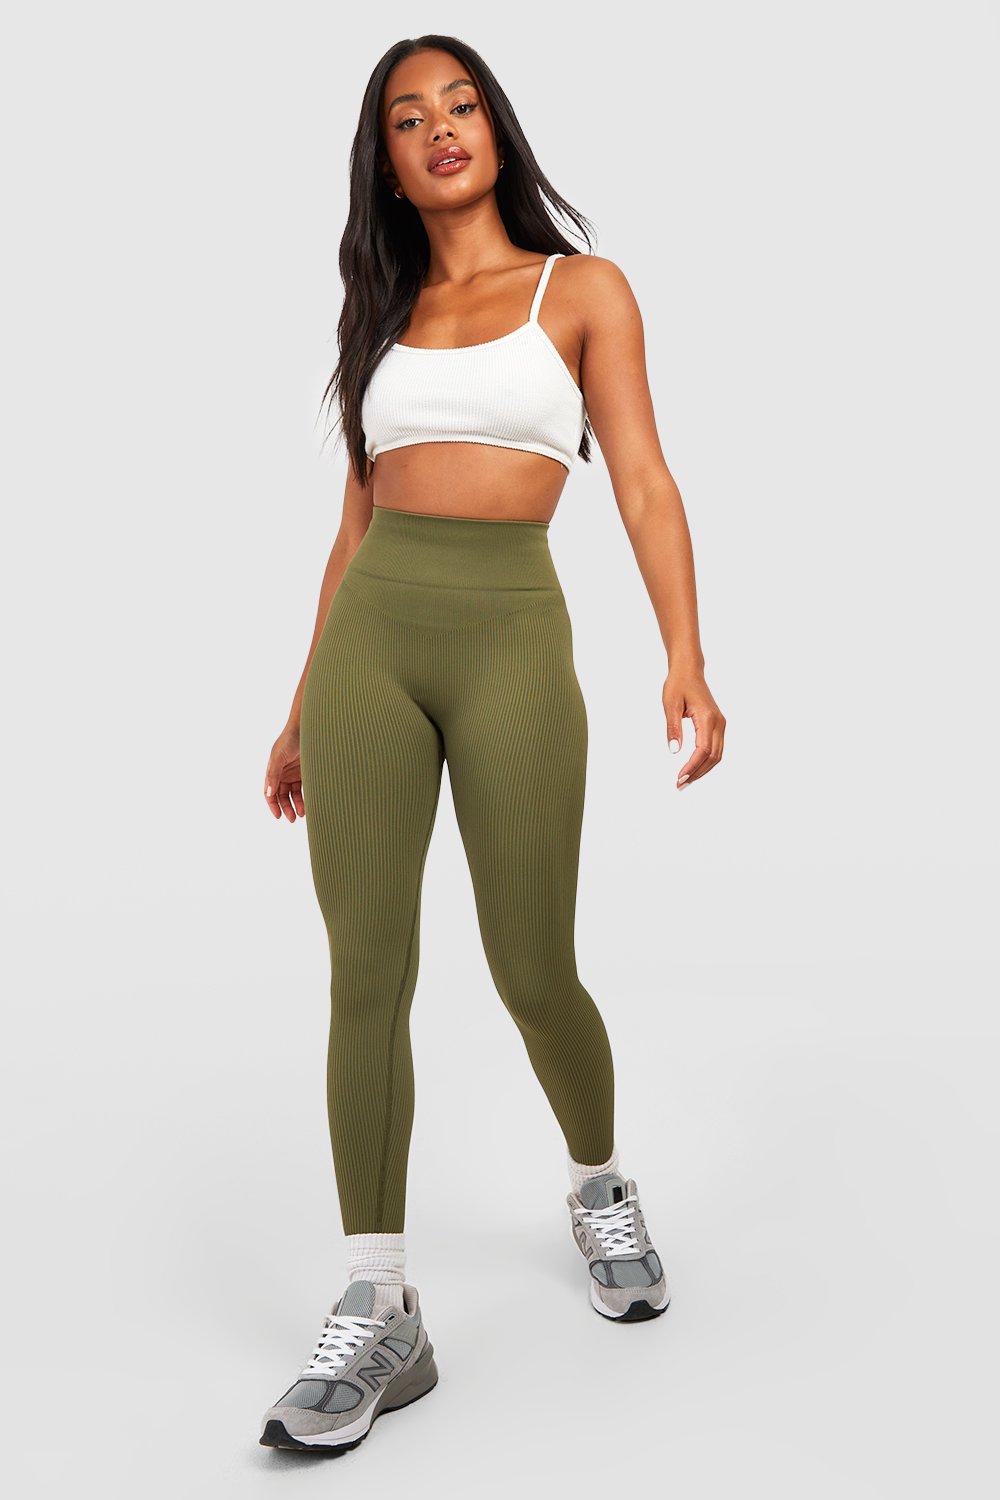  ELECTRIC YOGA: Seamless Collection